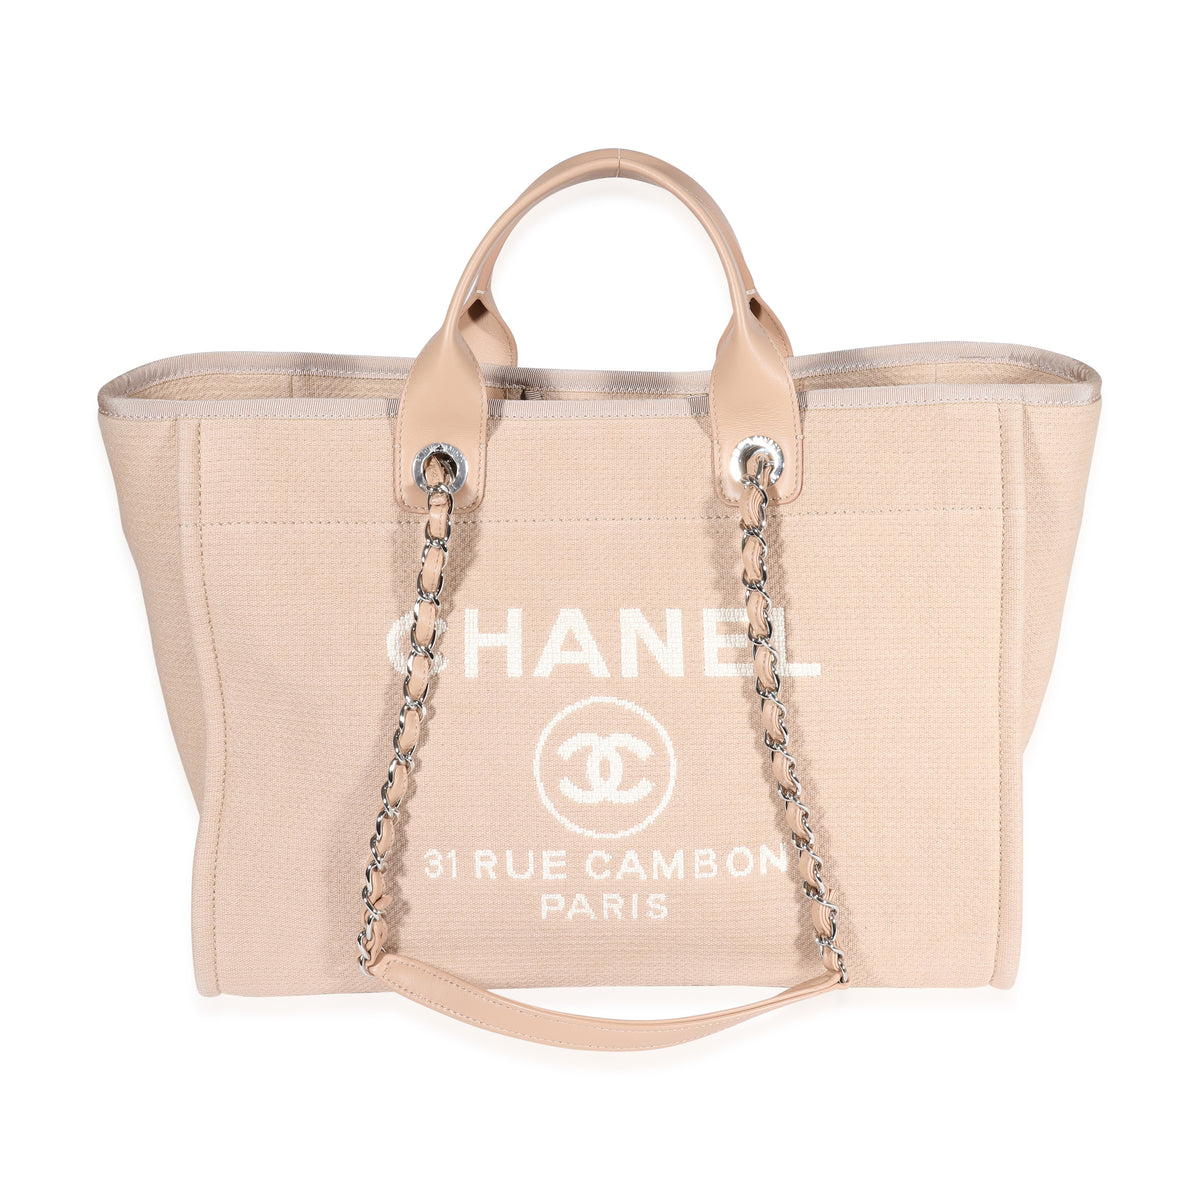 Chanel Large Deauville Pearls Shopping Bag - Neutrals Totes, Handbags -  CHA913951